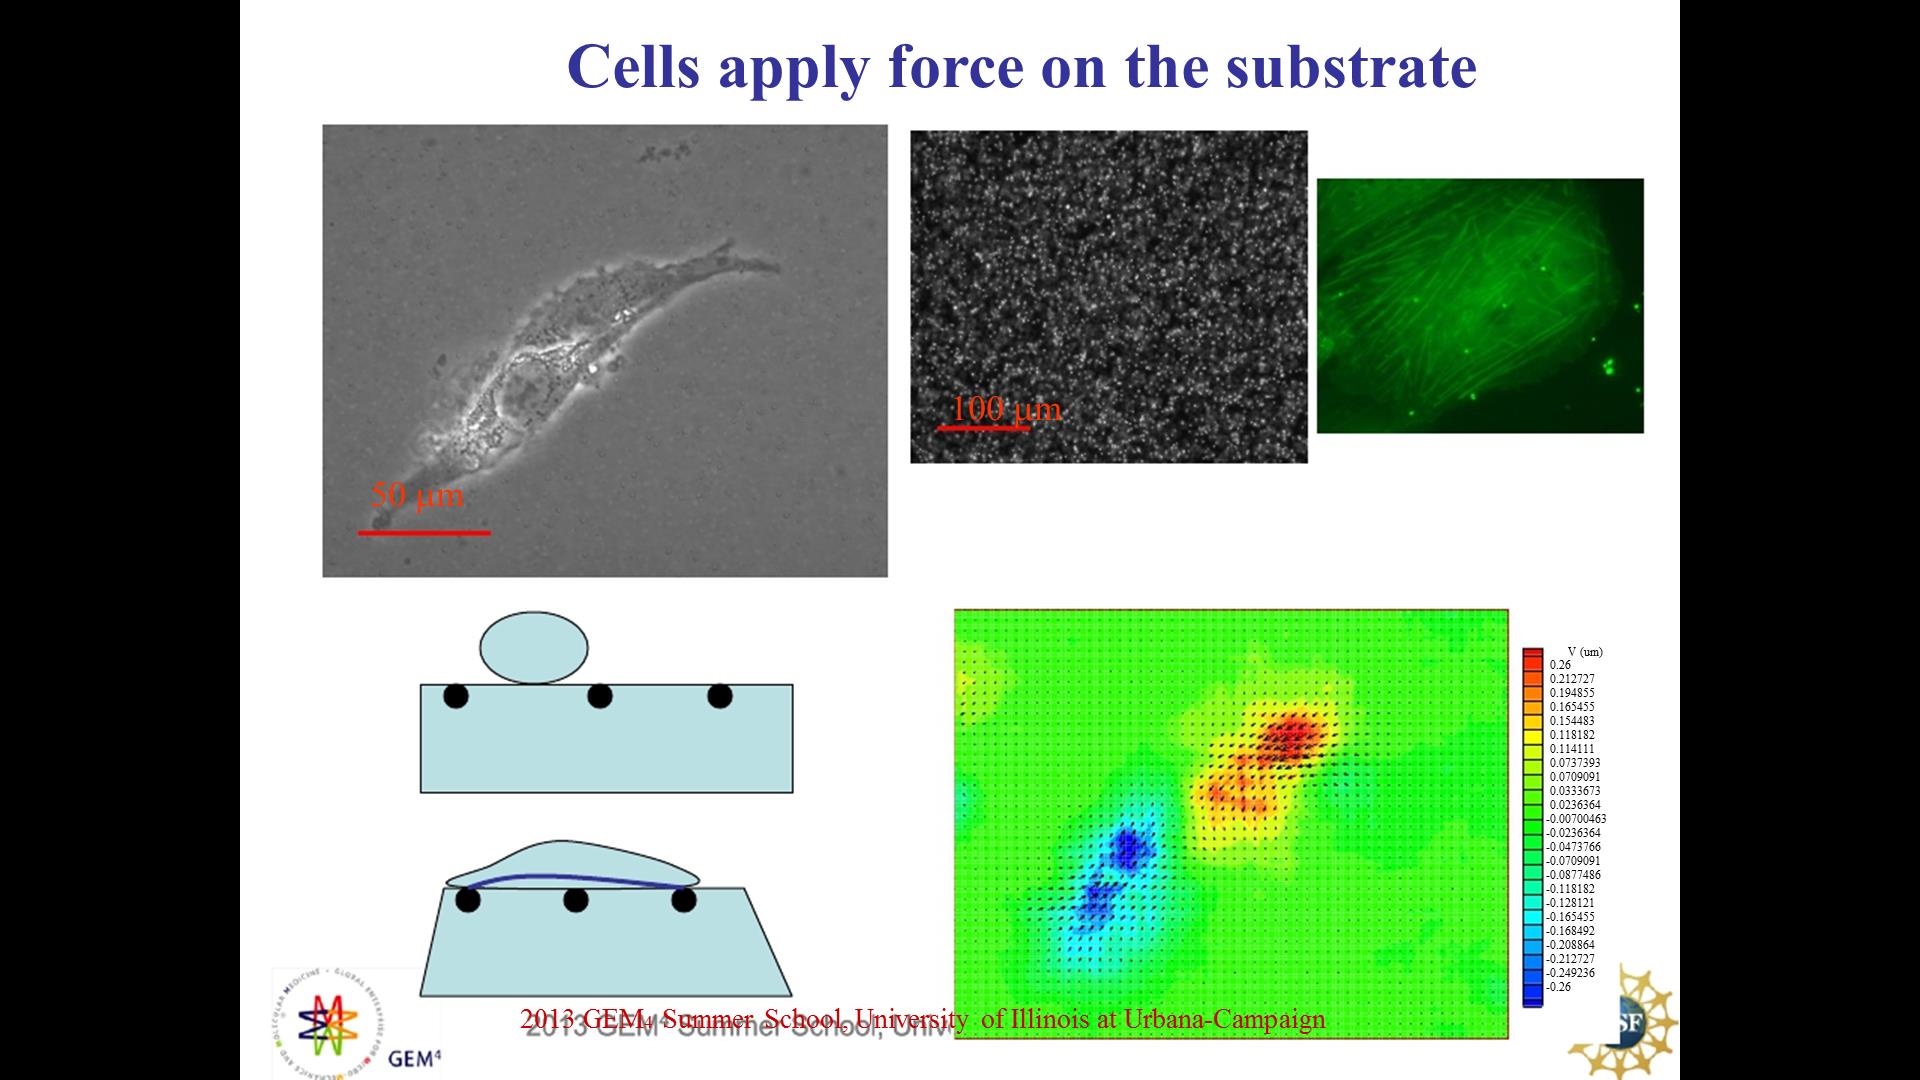 Cells apply force on the substrate